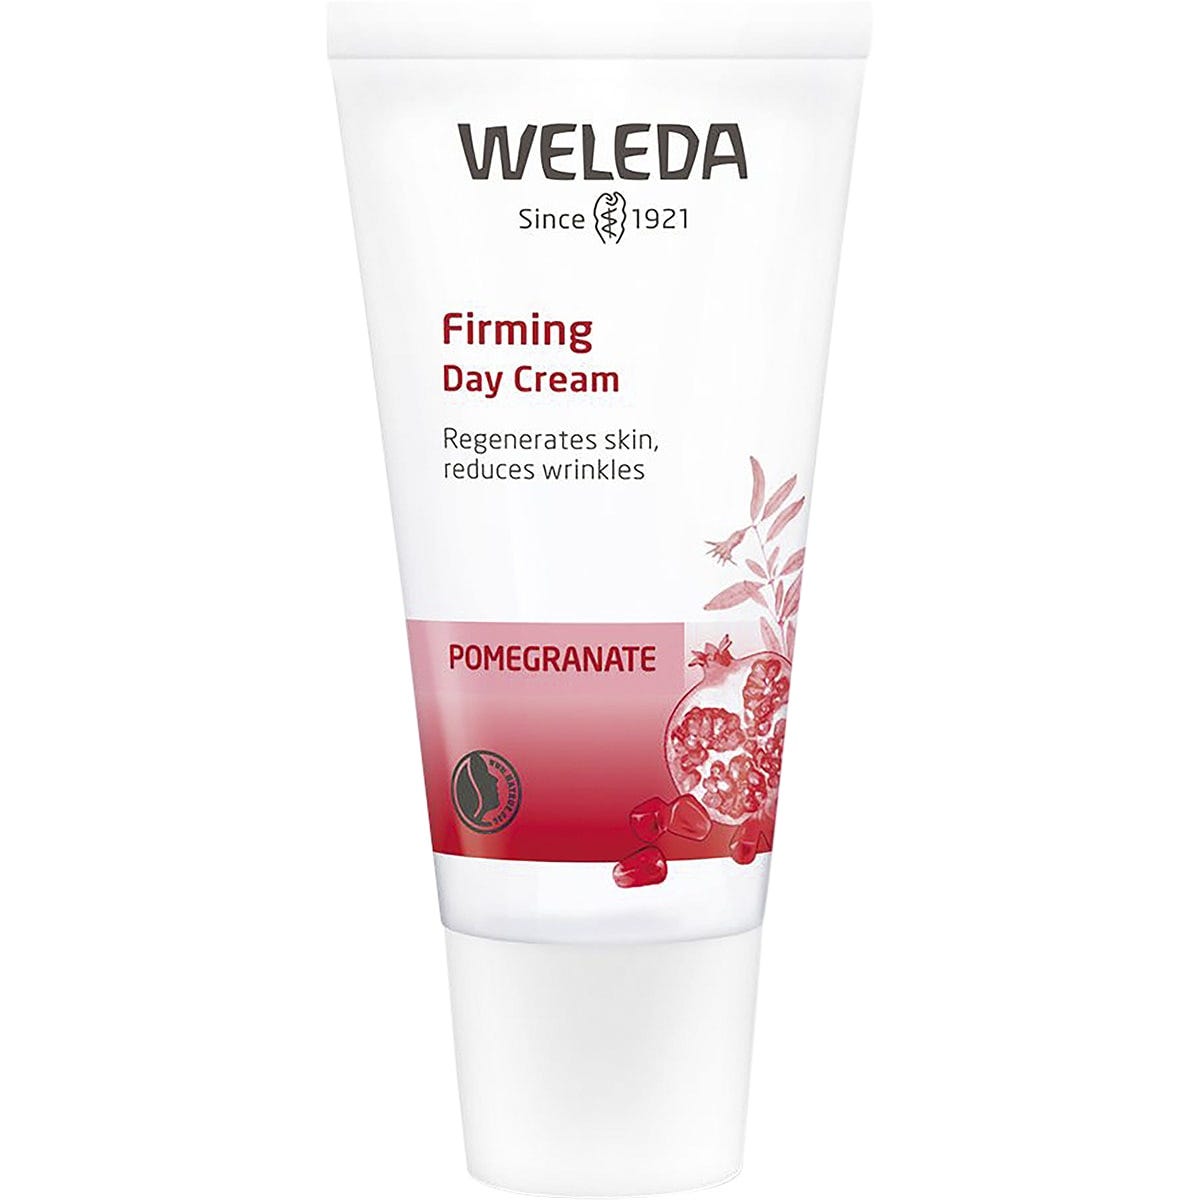 Weleda Firming Day Cream Pomegranate 30ml - Dr Earth - Skincare